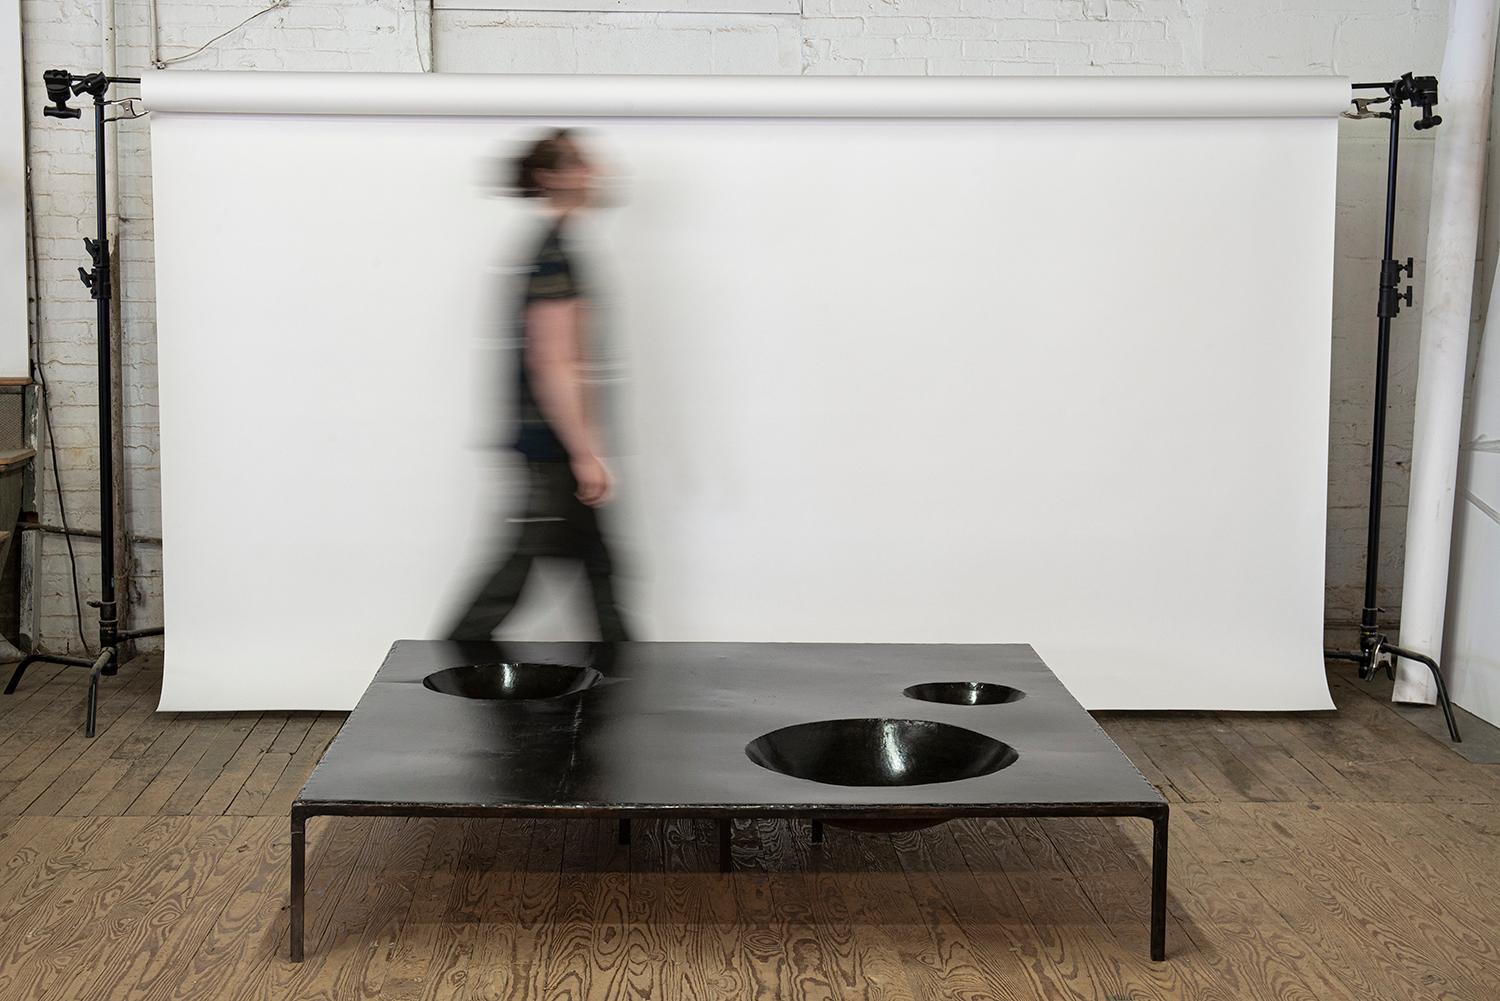 ***instock / archived one of one***
Table no. 11 - coffee table
Materials: rich patina, hand hewn quality, hand hammered steel bowls
J.M. Szymanski
d. 2018
 
Handmade entirely out of blackened and waxed steel, this table features geometric